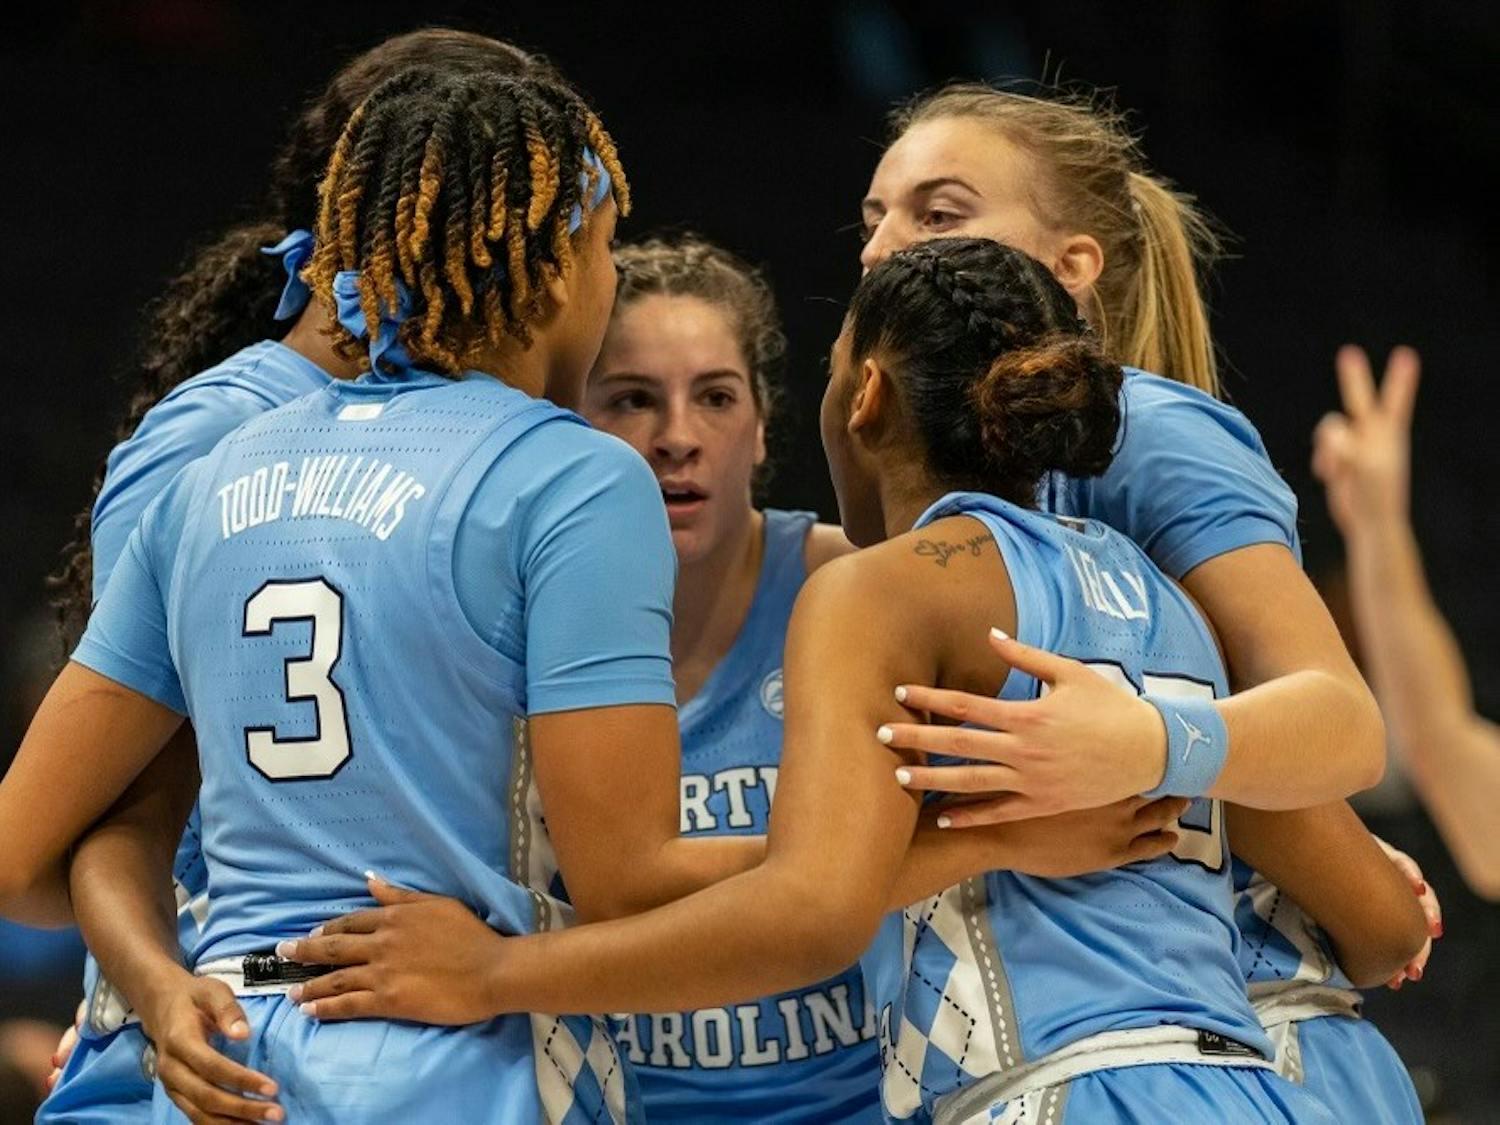 UNC huddles up before a free throw during the women’s basketball game against Michigan in the Jumpman Invitational at the Spectrum Center on Tuesday, Dec. 20, 2022.